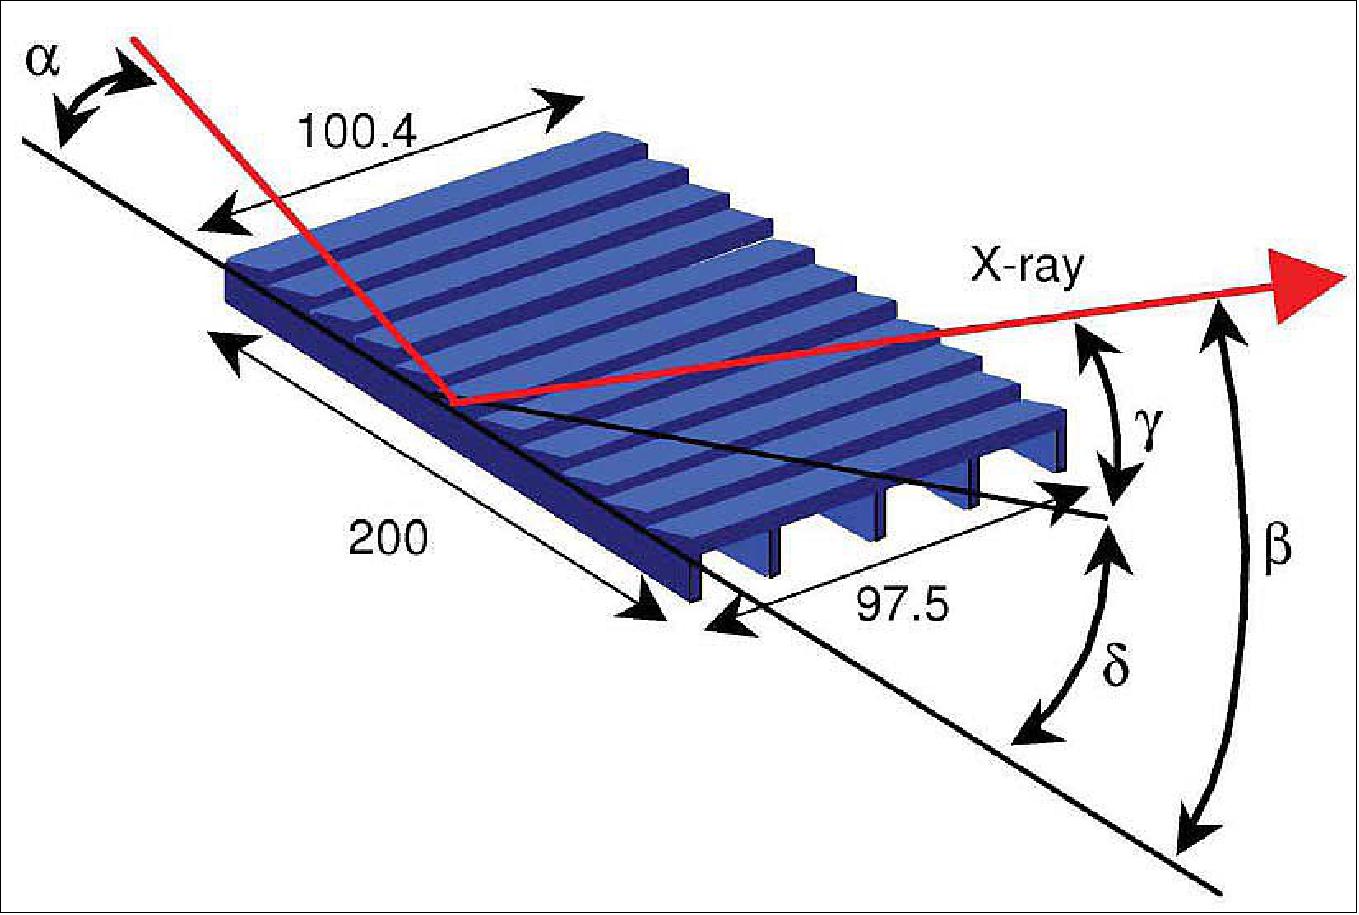 Figure 149: Schematic drawing of a grating, including some of the key dimensions and angles (α=1.5762, β=2.9739 (for blaze wavelength of 1.5 nm, γ=2.2751, δ=0.6989, angles all in degrees).